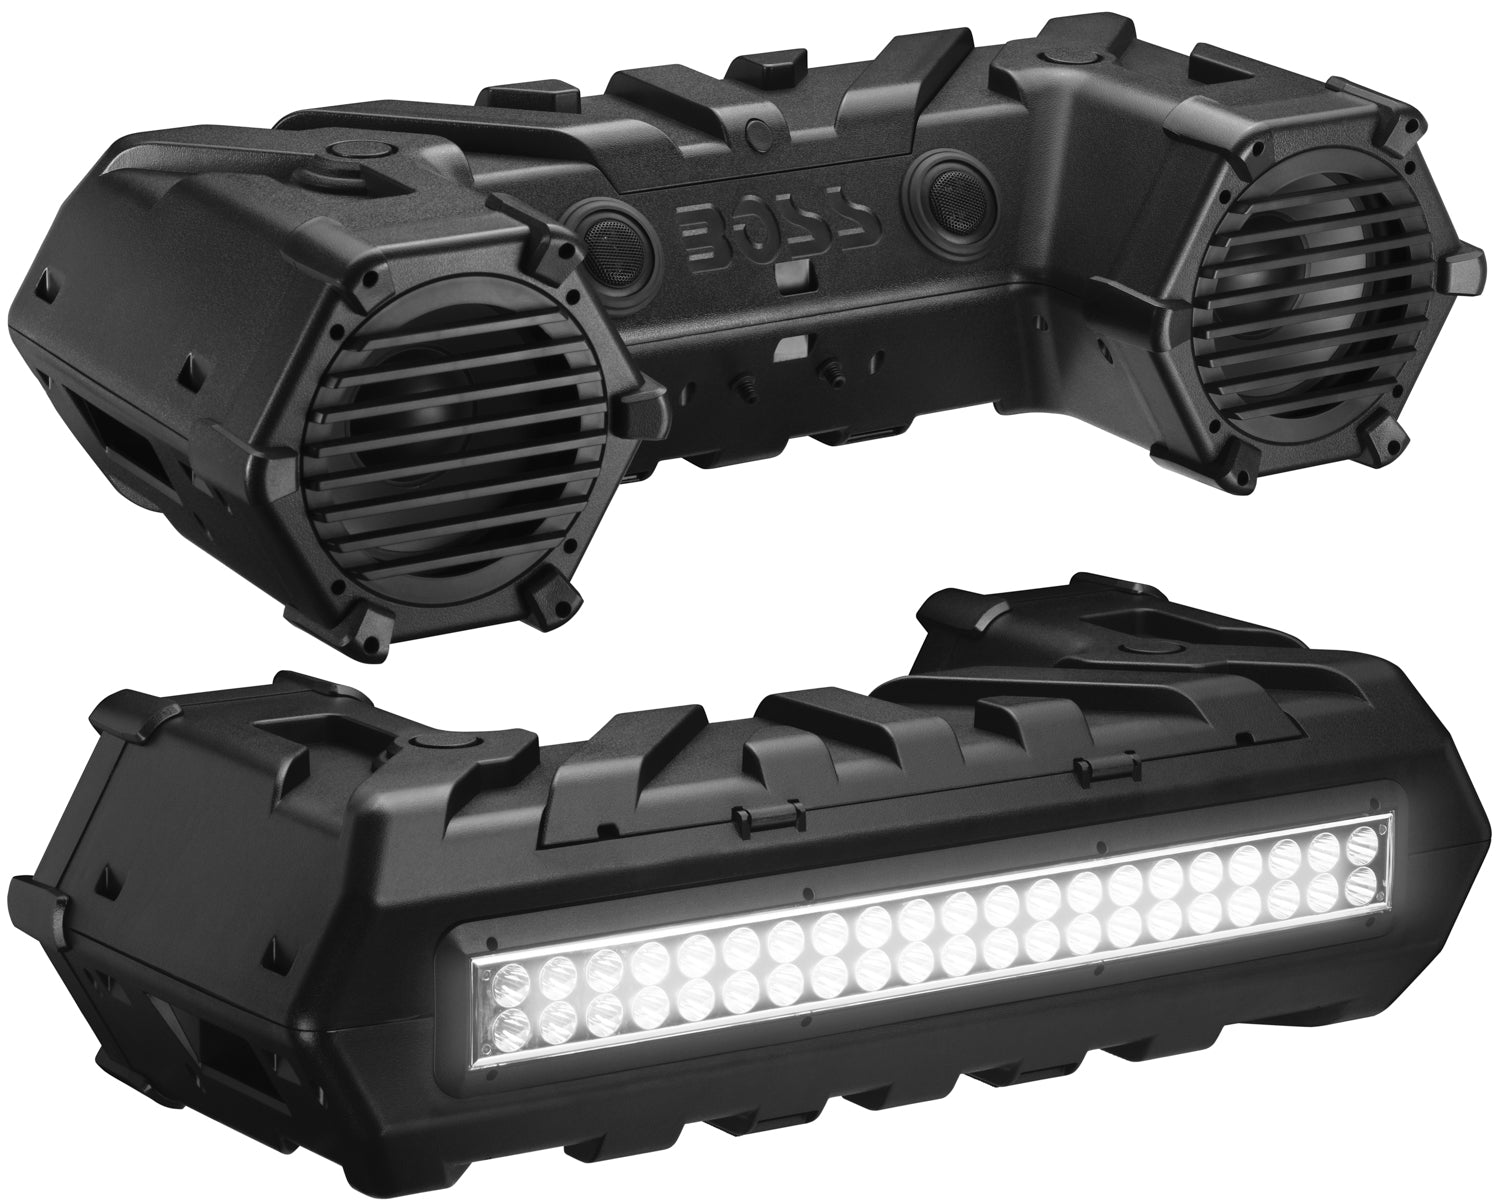 Boss Audio Systems ATVB95LED 8" Bluetooth Sound System With LED Light Bar and Storage